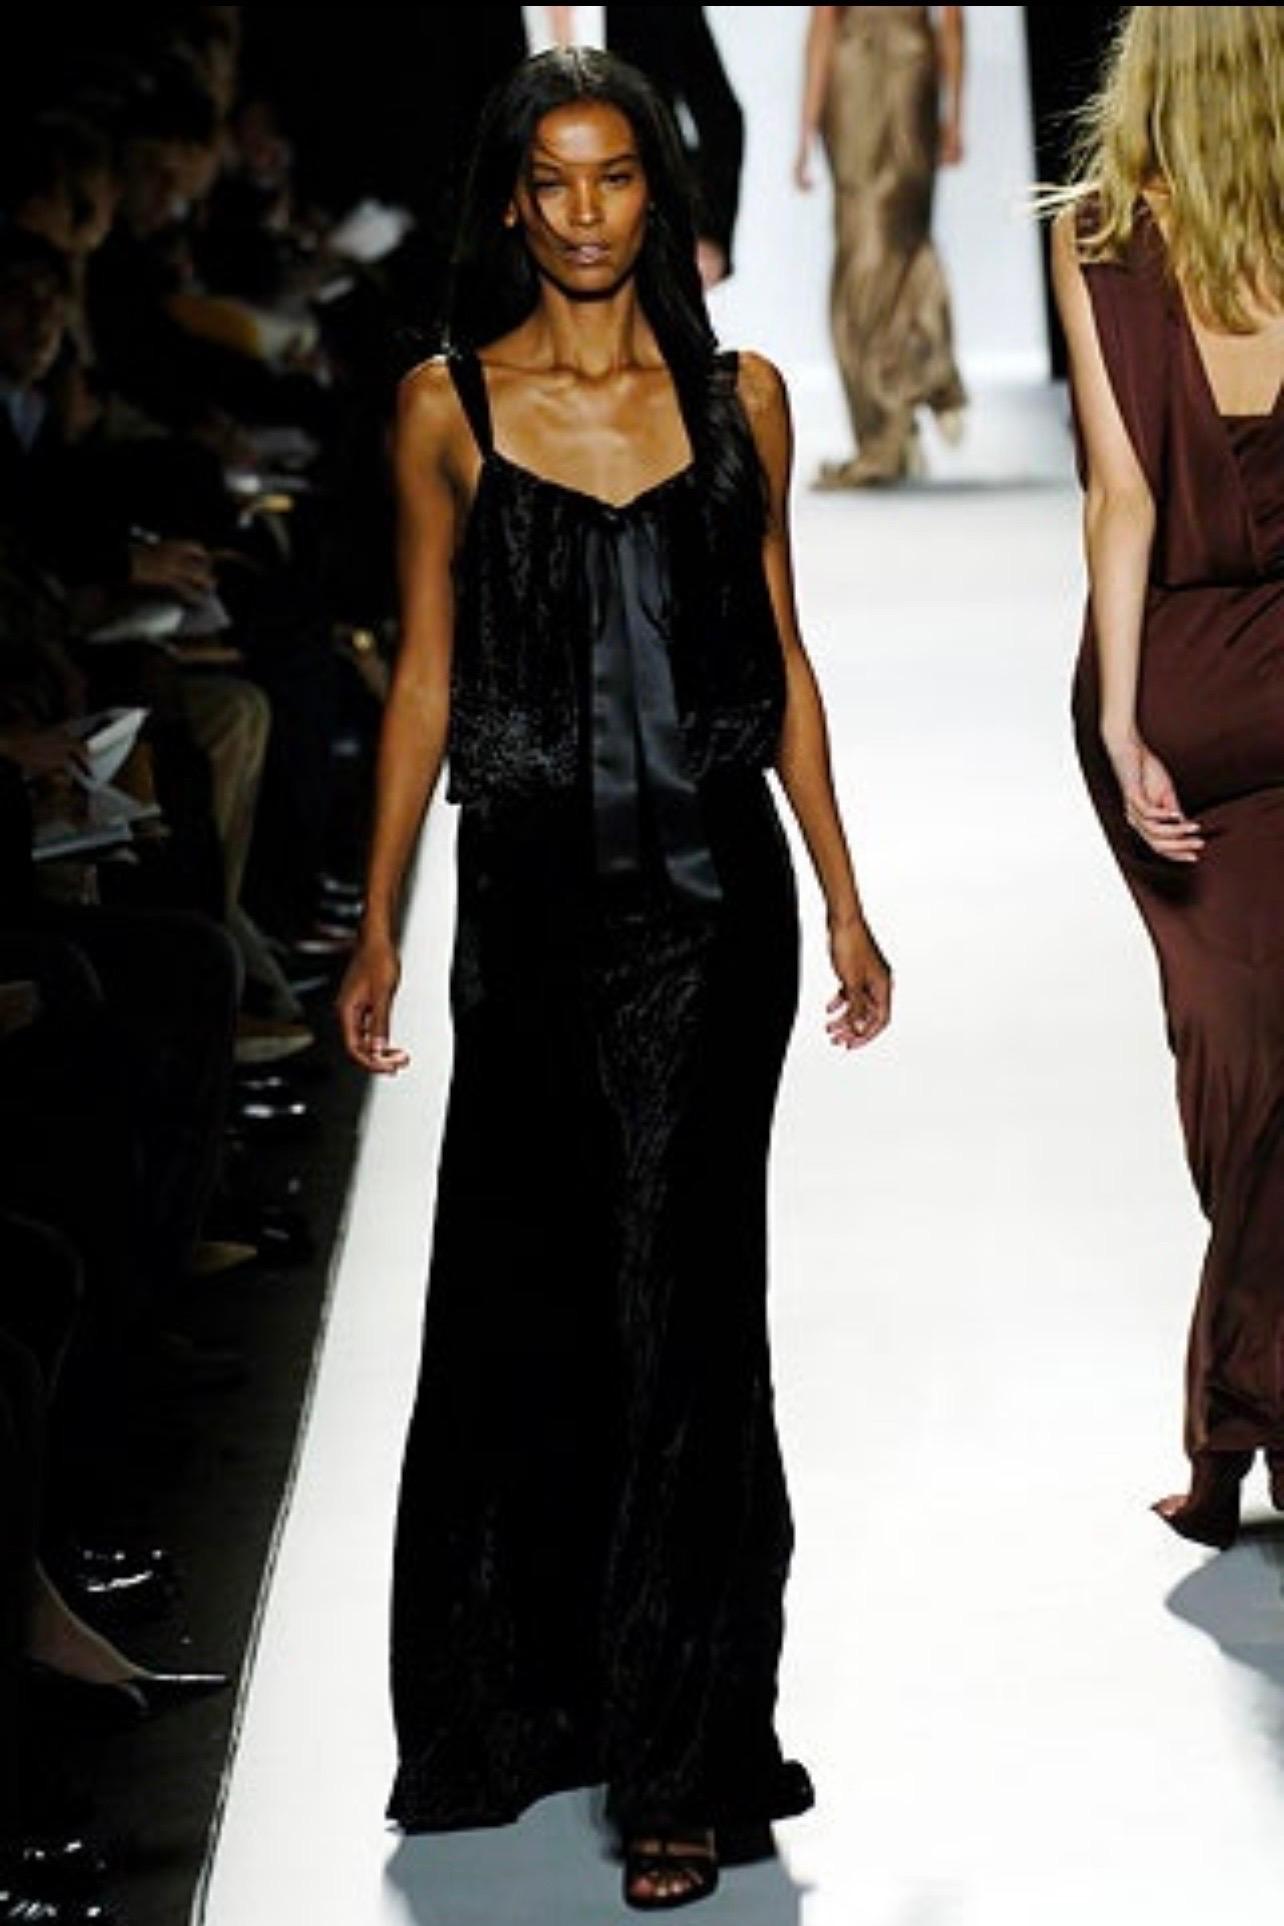 Brand new with original tags MICHAEL KORS COLLECTION Fall 2006 Runway black crushed velvet evening gown ! This was look # 66 on the Runway. Soft crushed velvet fabric is composed of Rayon (80%) and Silk (20%). Black silk straps at each shoulder,